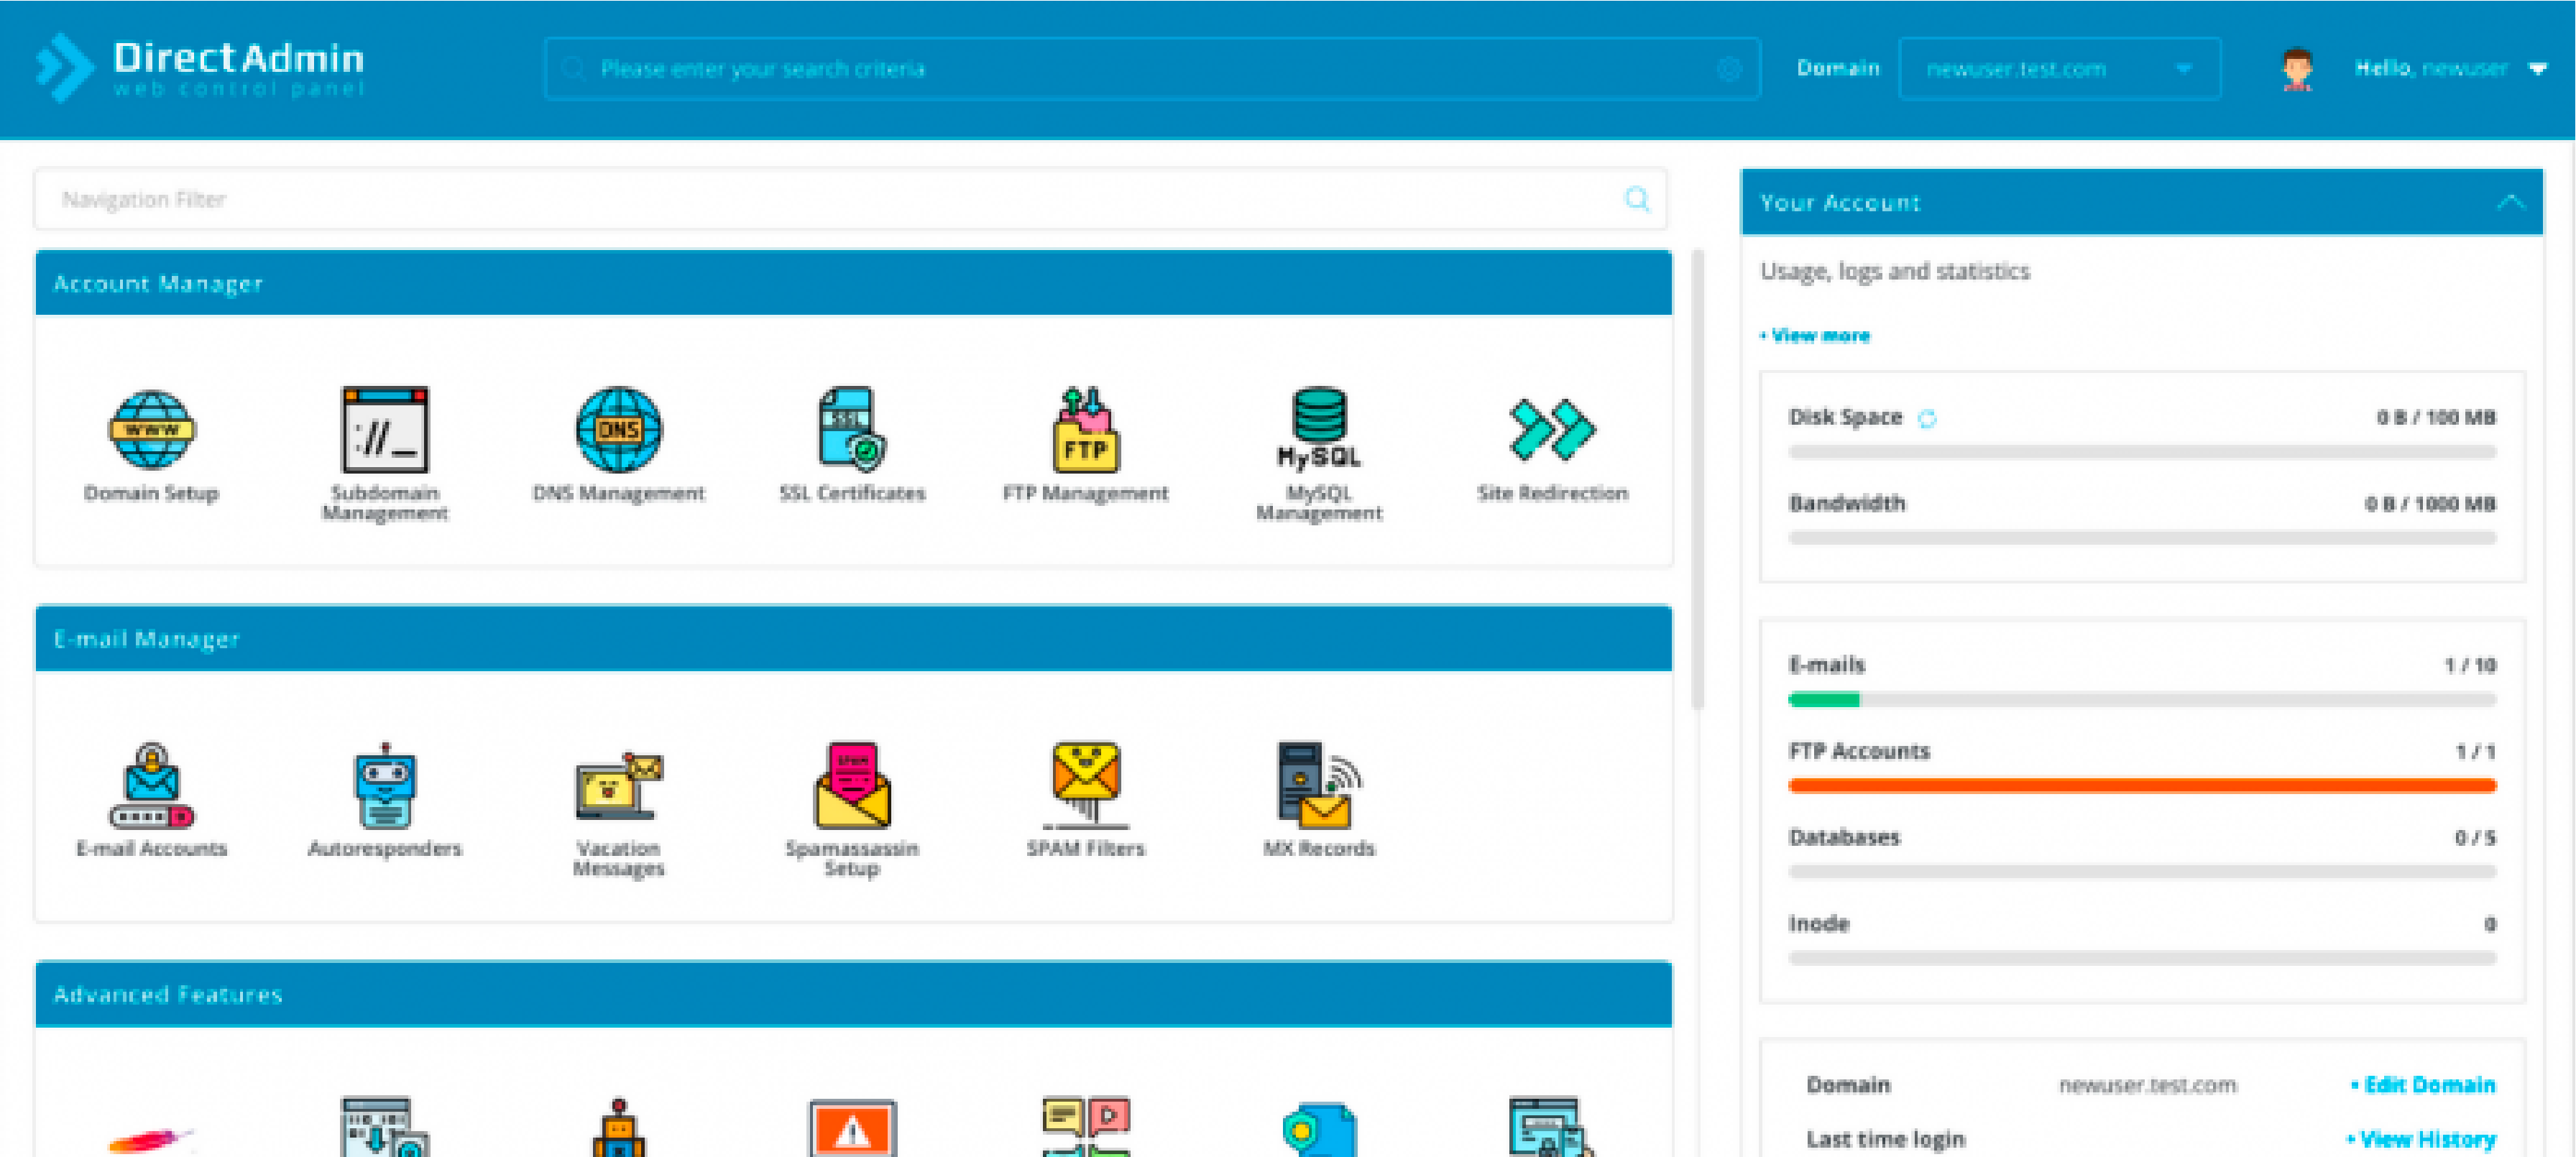 DirectAdmin dashboard offering streamlined web hosting management features.